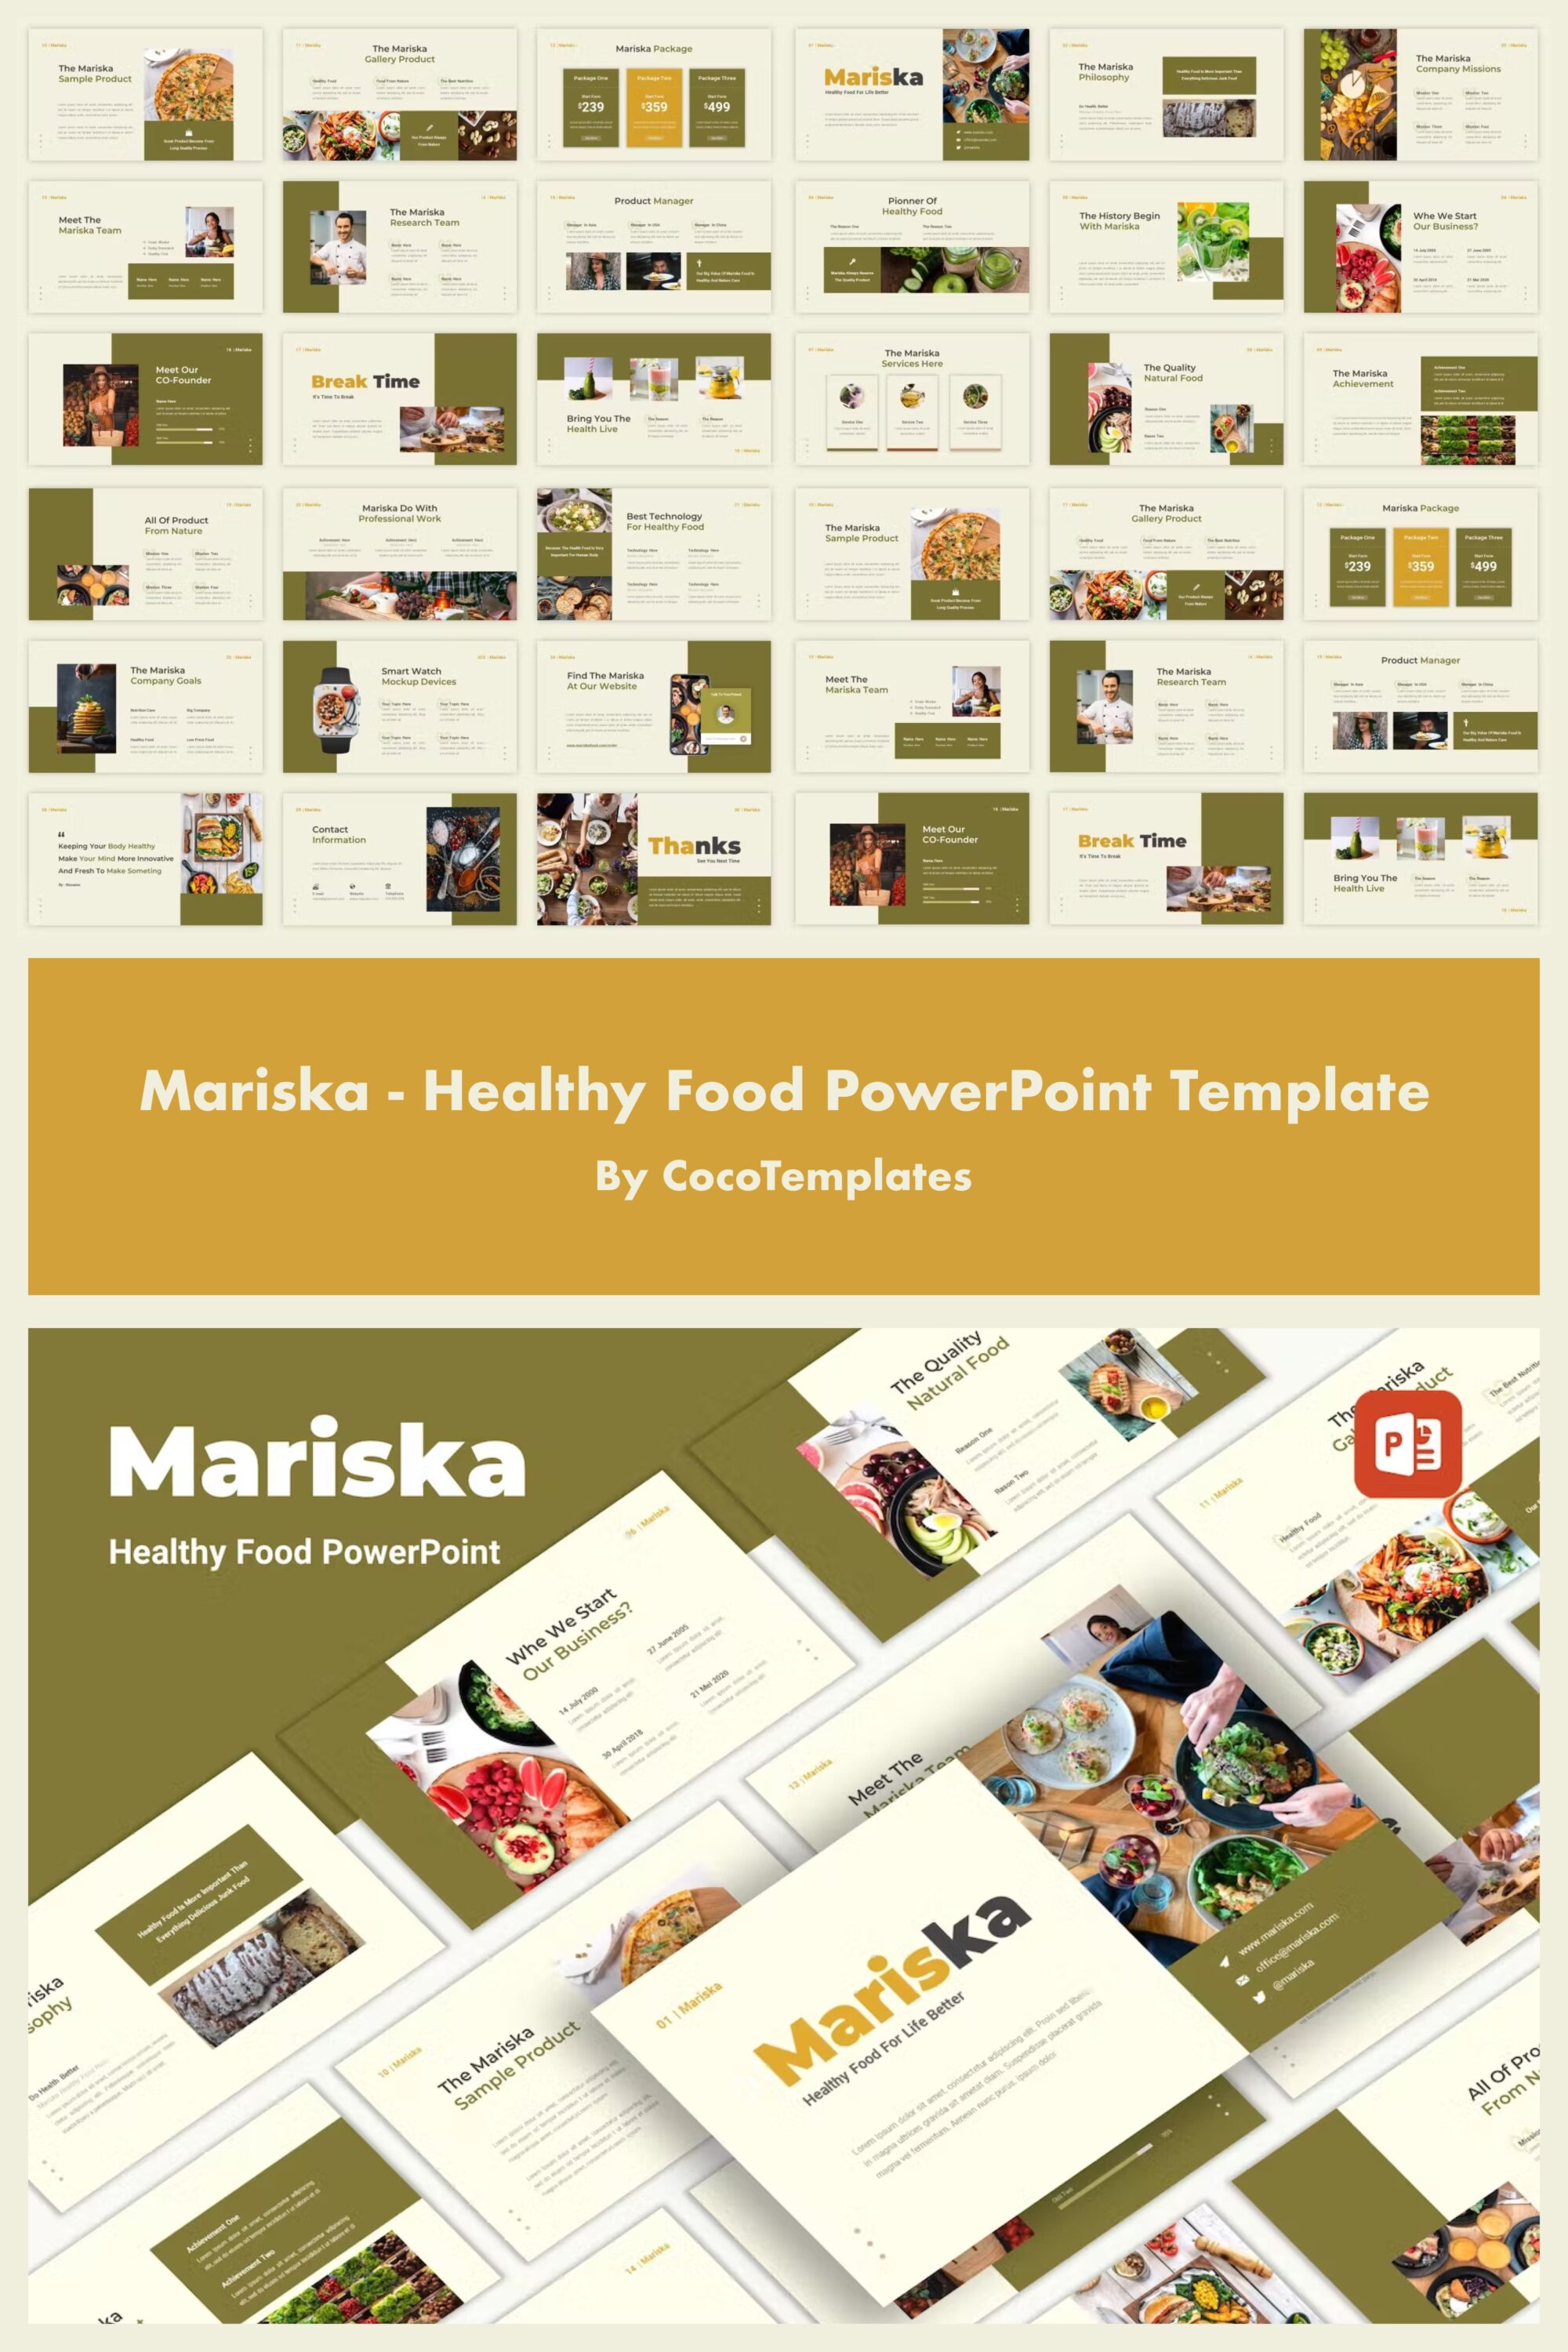 Mariska Healthy Food PowerPoint Template - pinterest image preview.